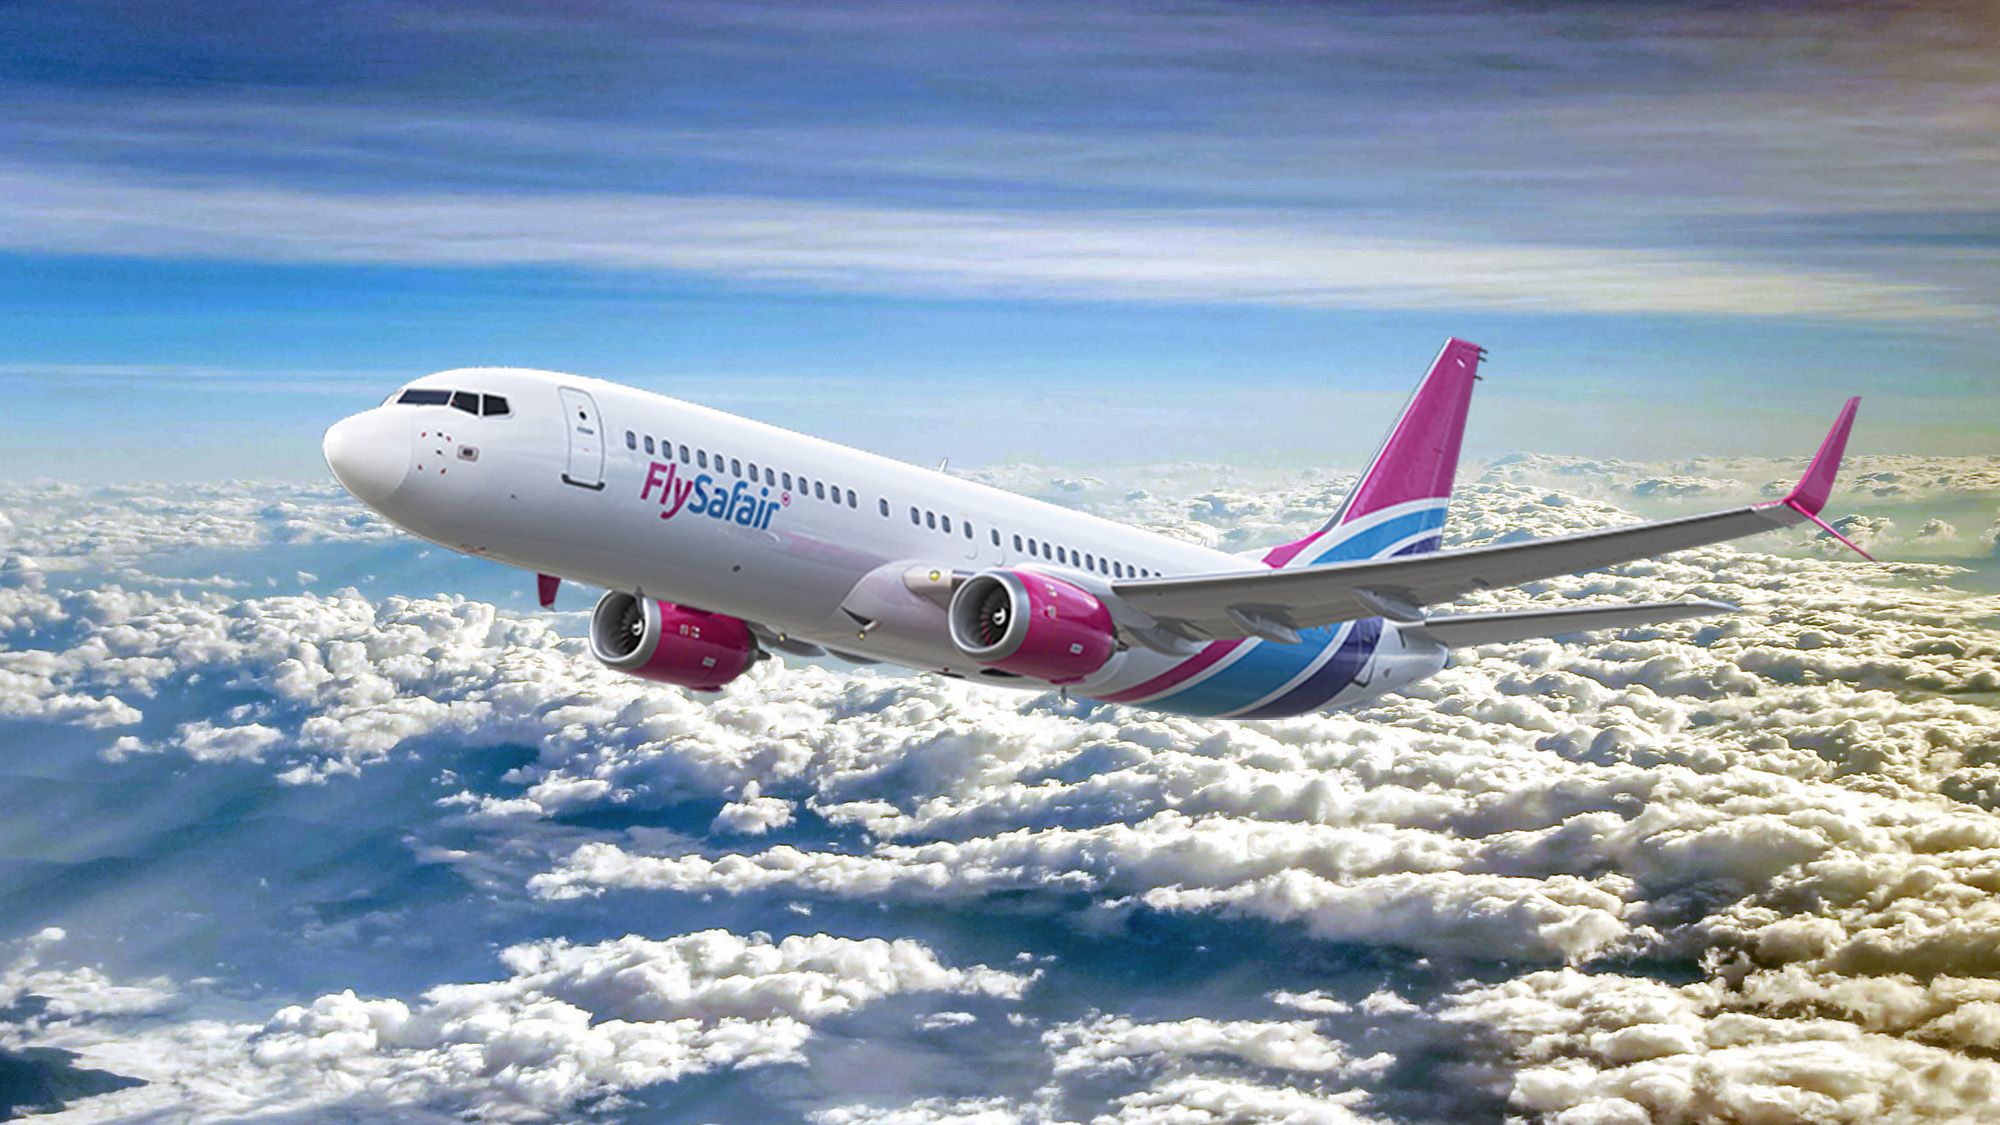 <strong>FlySafair awarded rights to operate 3 additional regional routes</strong>